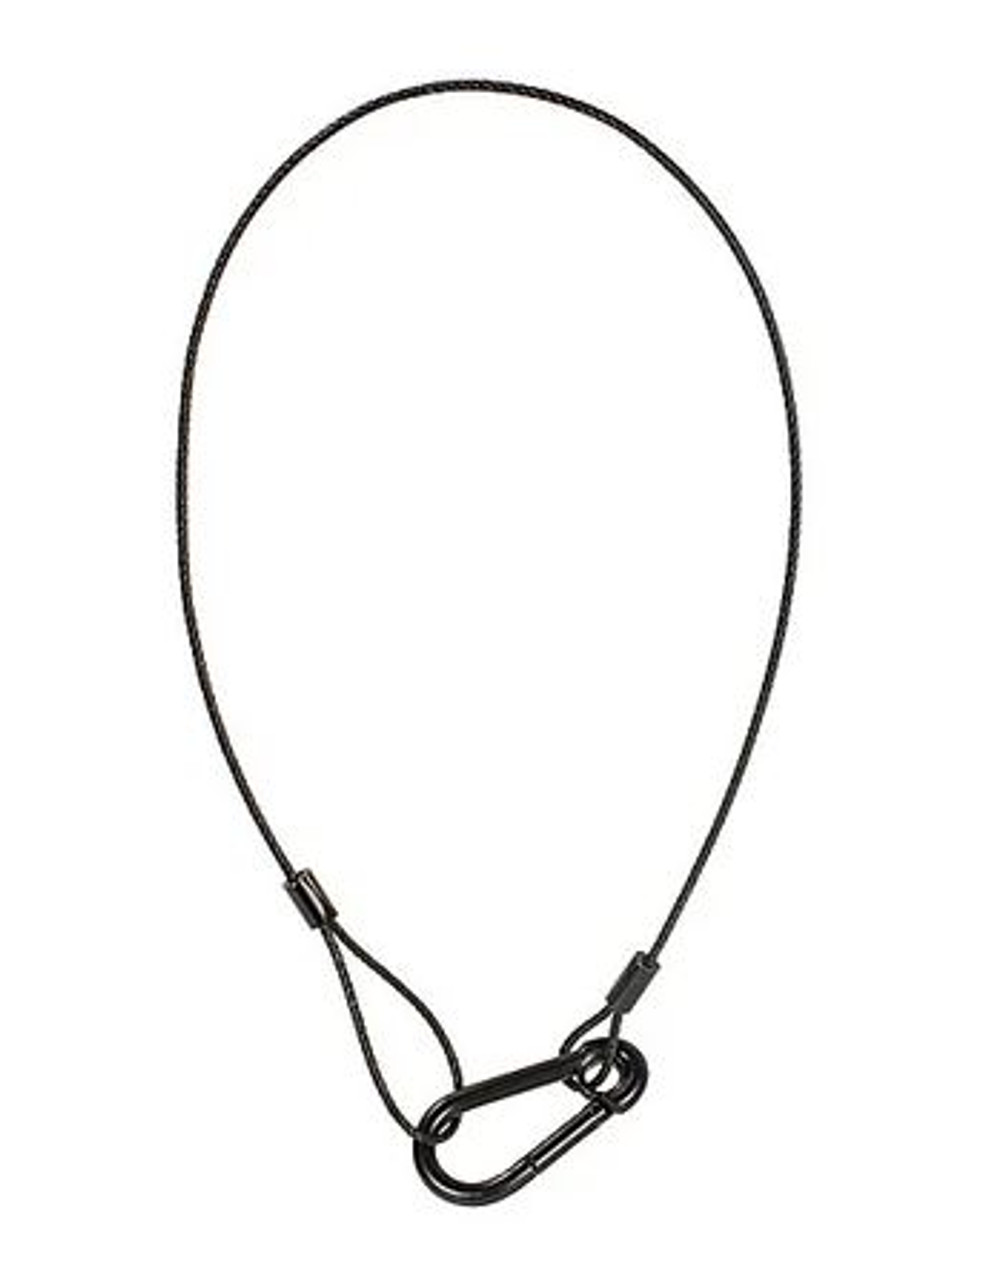 ETC 400SC 800mm Ellipsoidal Safety Cable, 30 inches (Black)